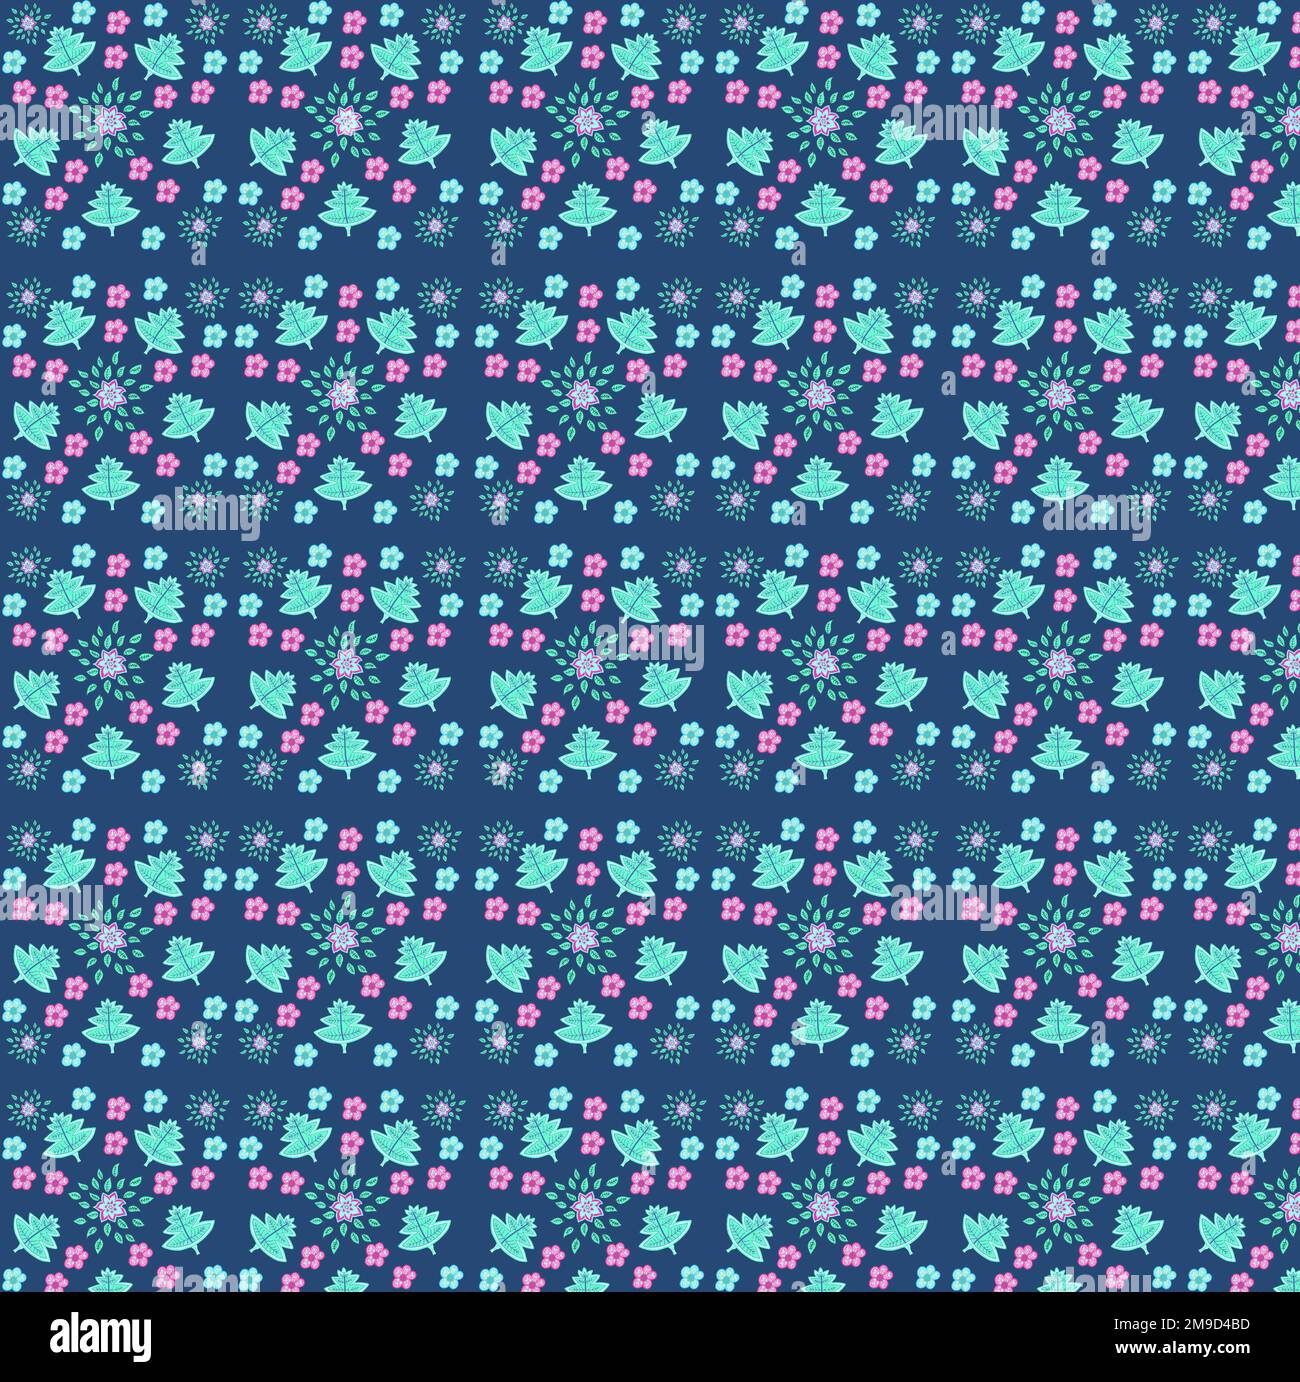 Floral design in blues, greens and pinks. Stock Photo